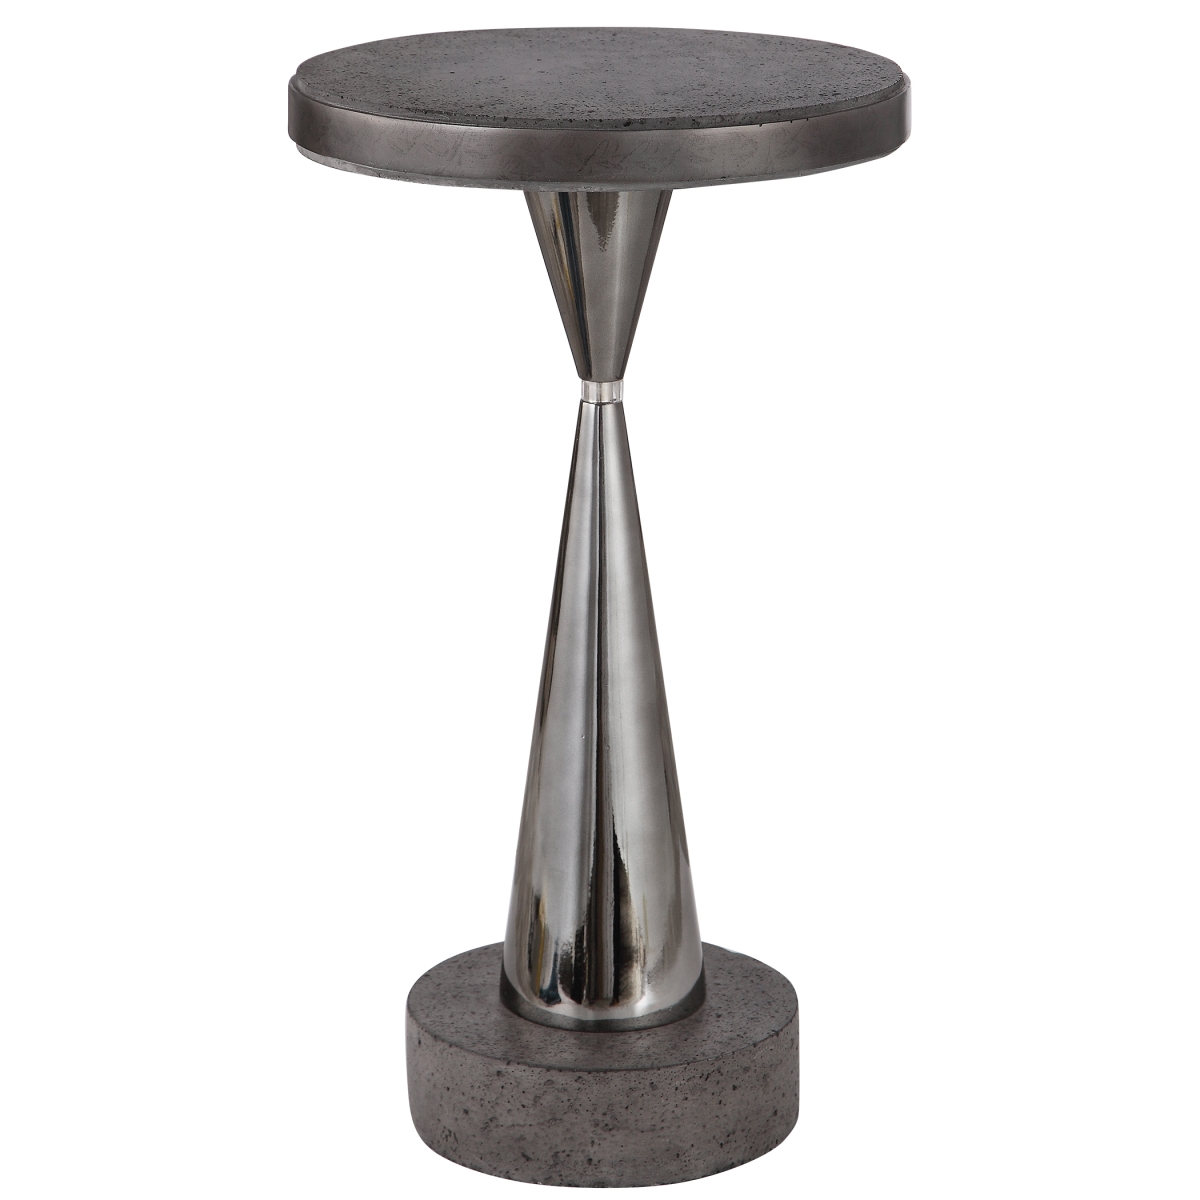 Picture of 212 Main 24924 Simons Concrete Accent Table